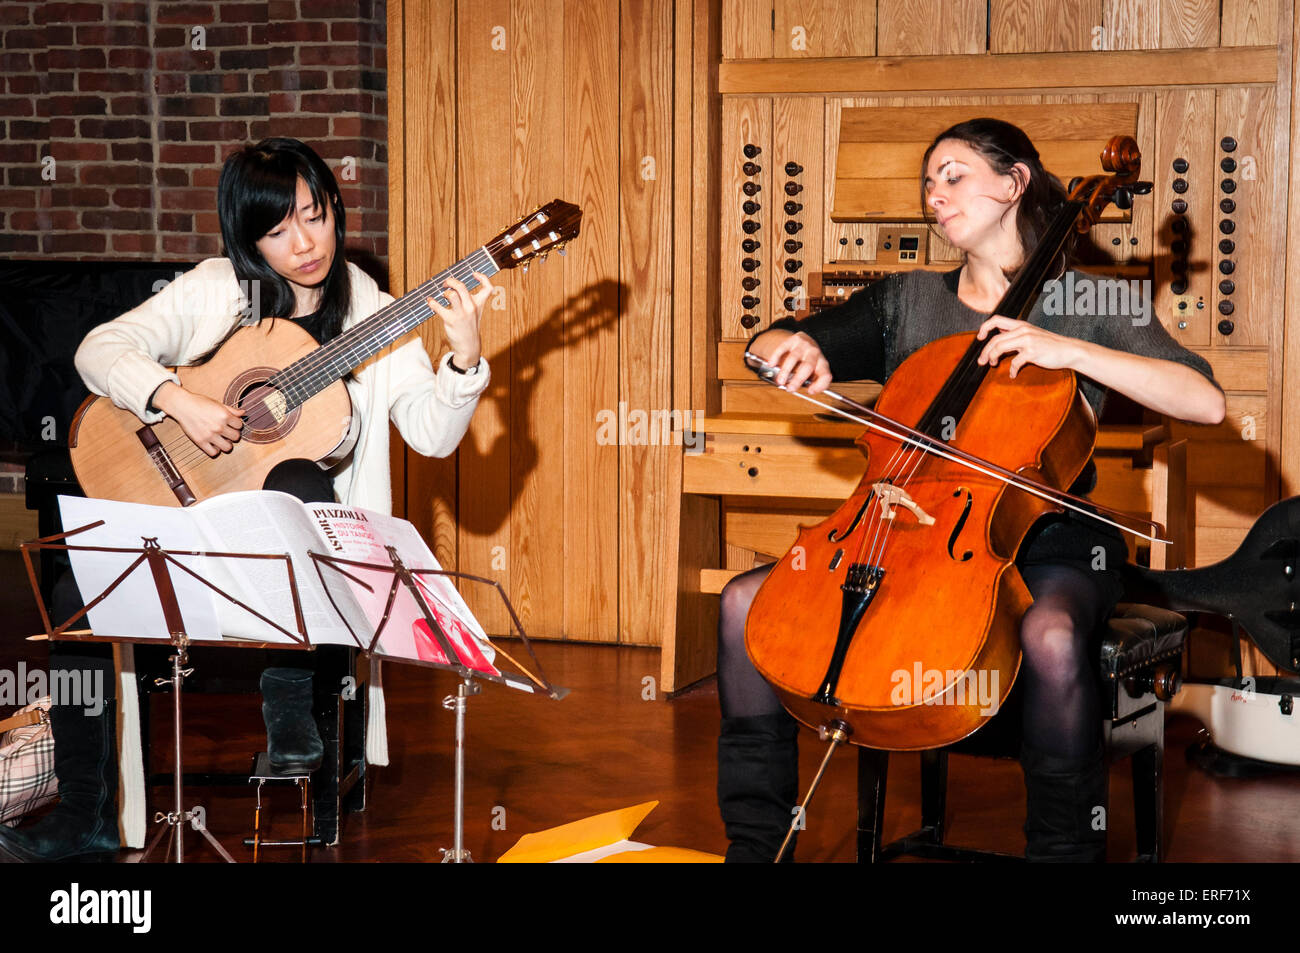 Xuefei Yang (Left) and Natalie Clein (Right) rehearsing together at the Turner Sims Concert Hall, Southampton, England. Stock Photo